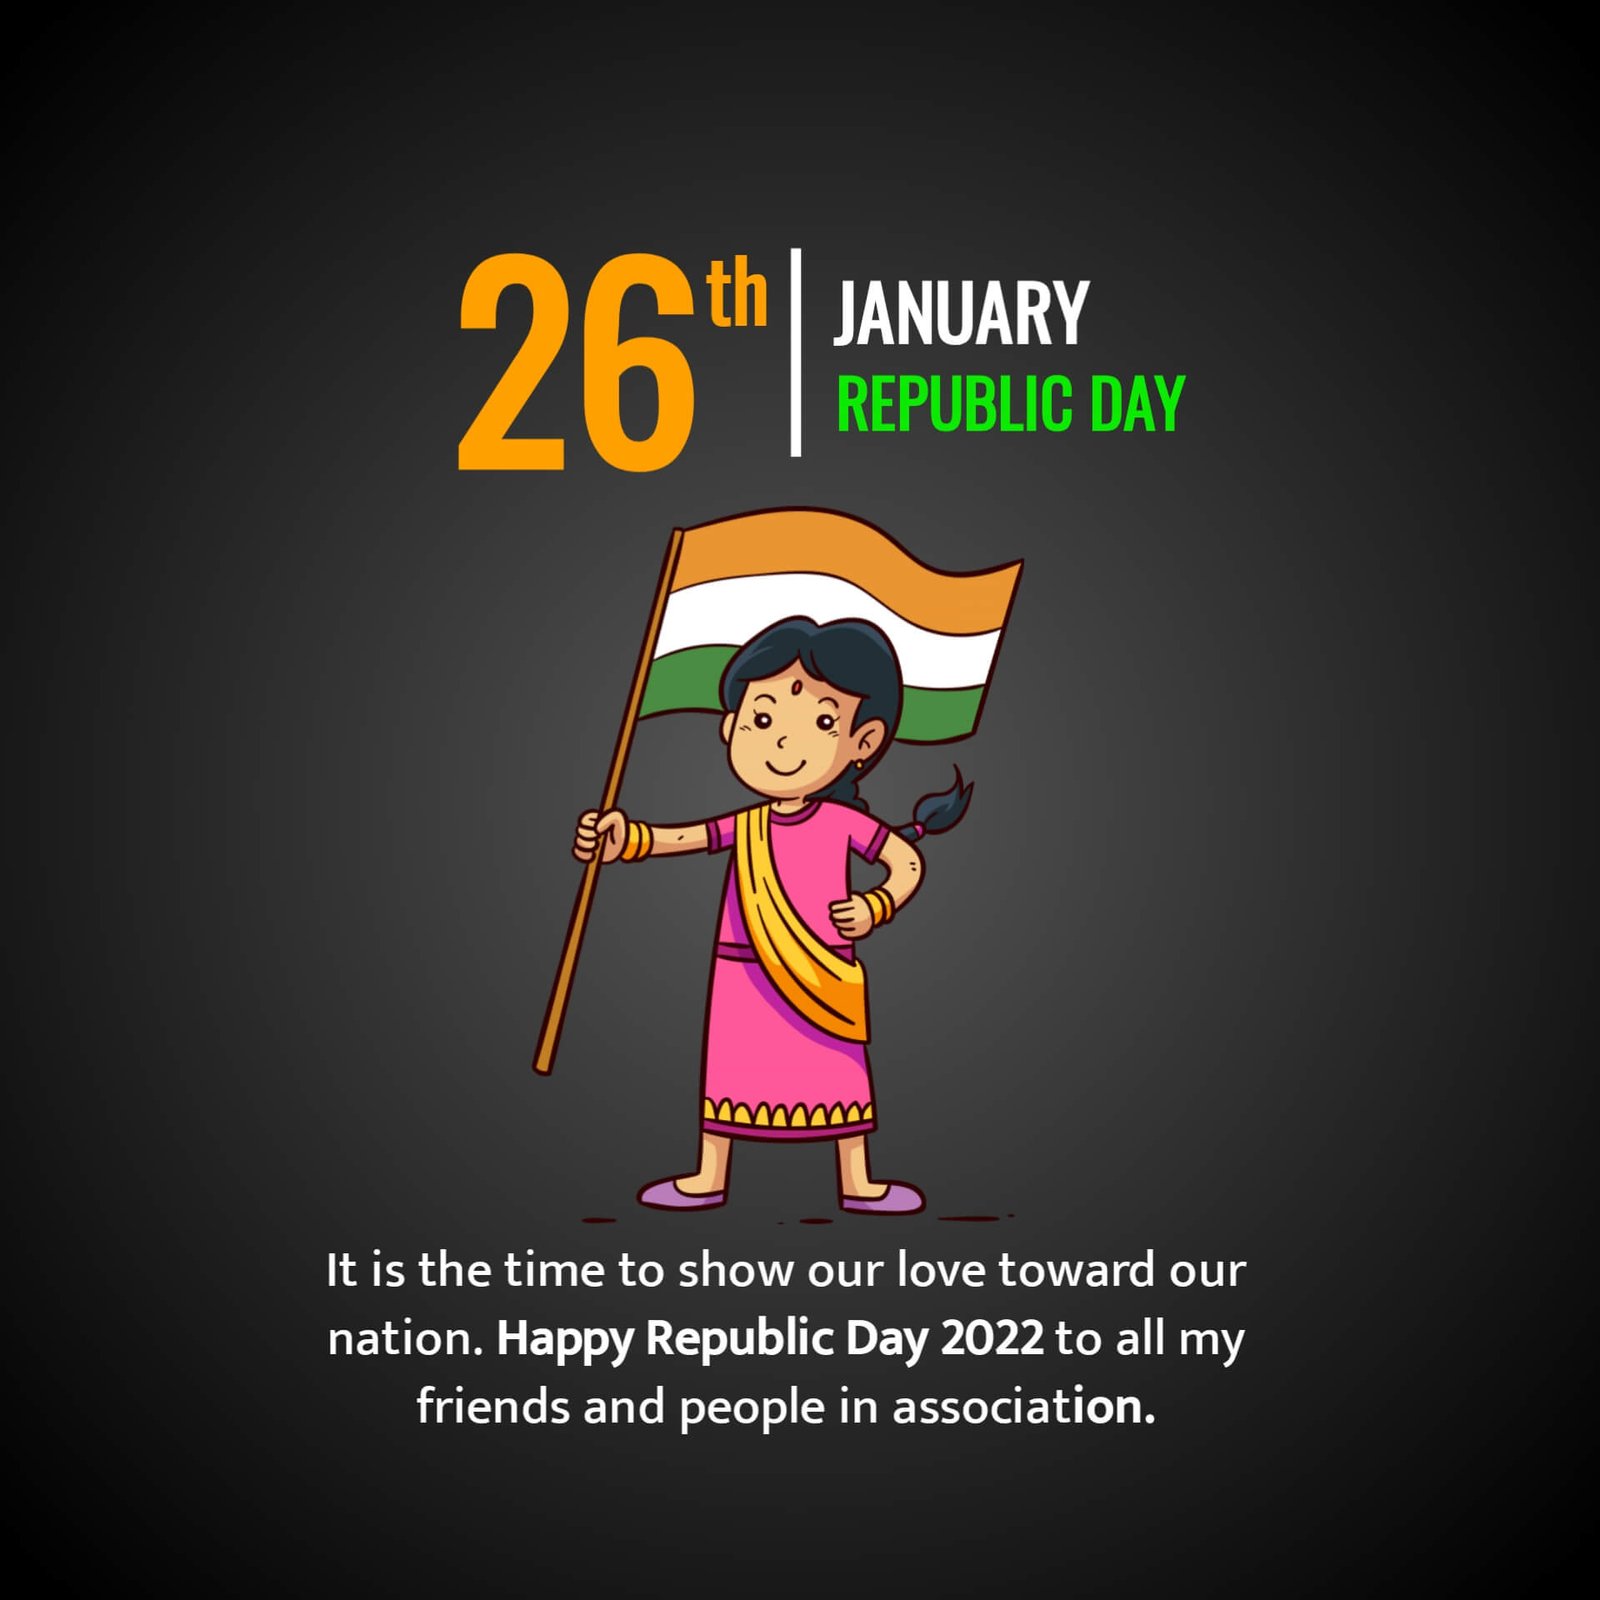 republic day images, republic day quotes, republic day wishes